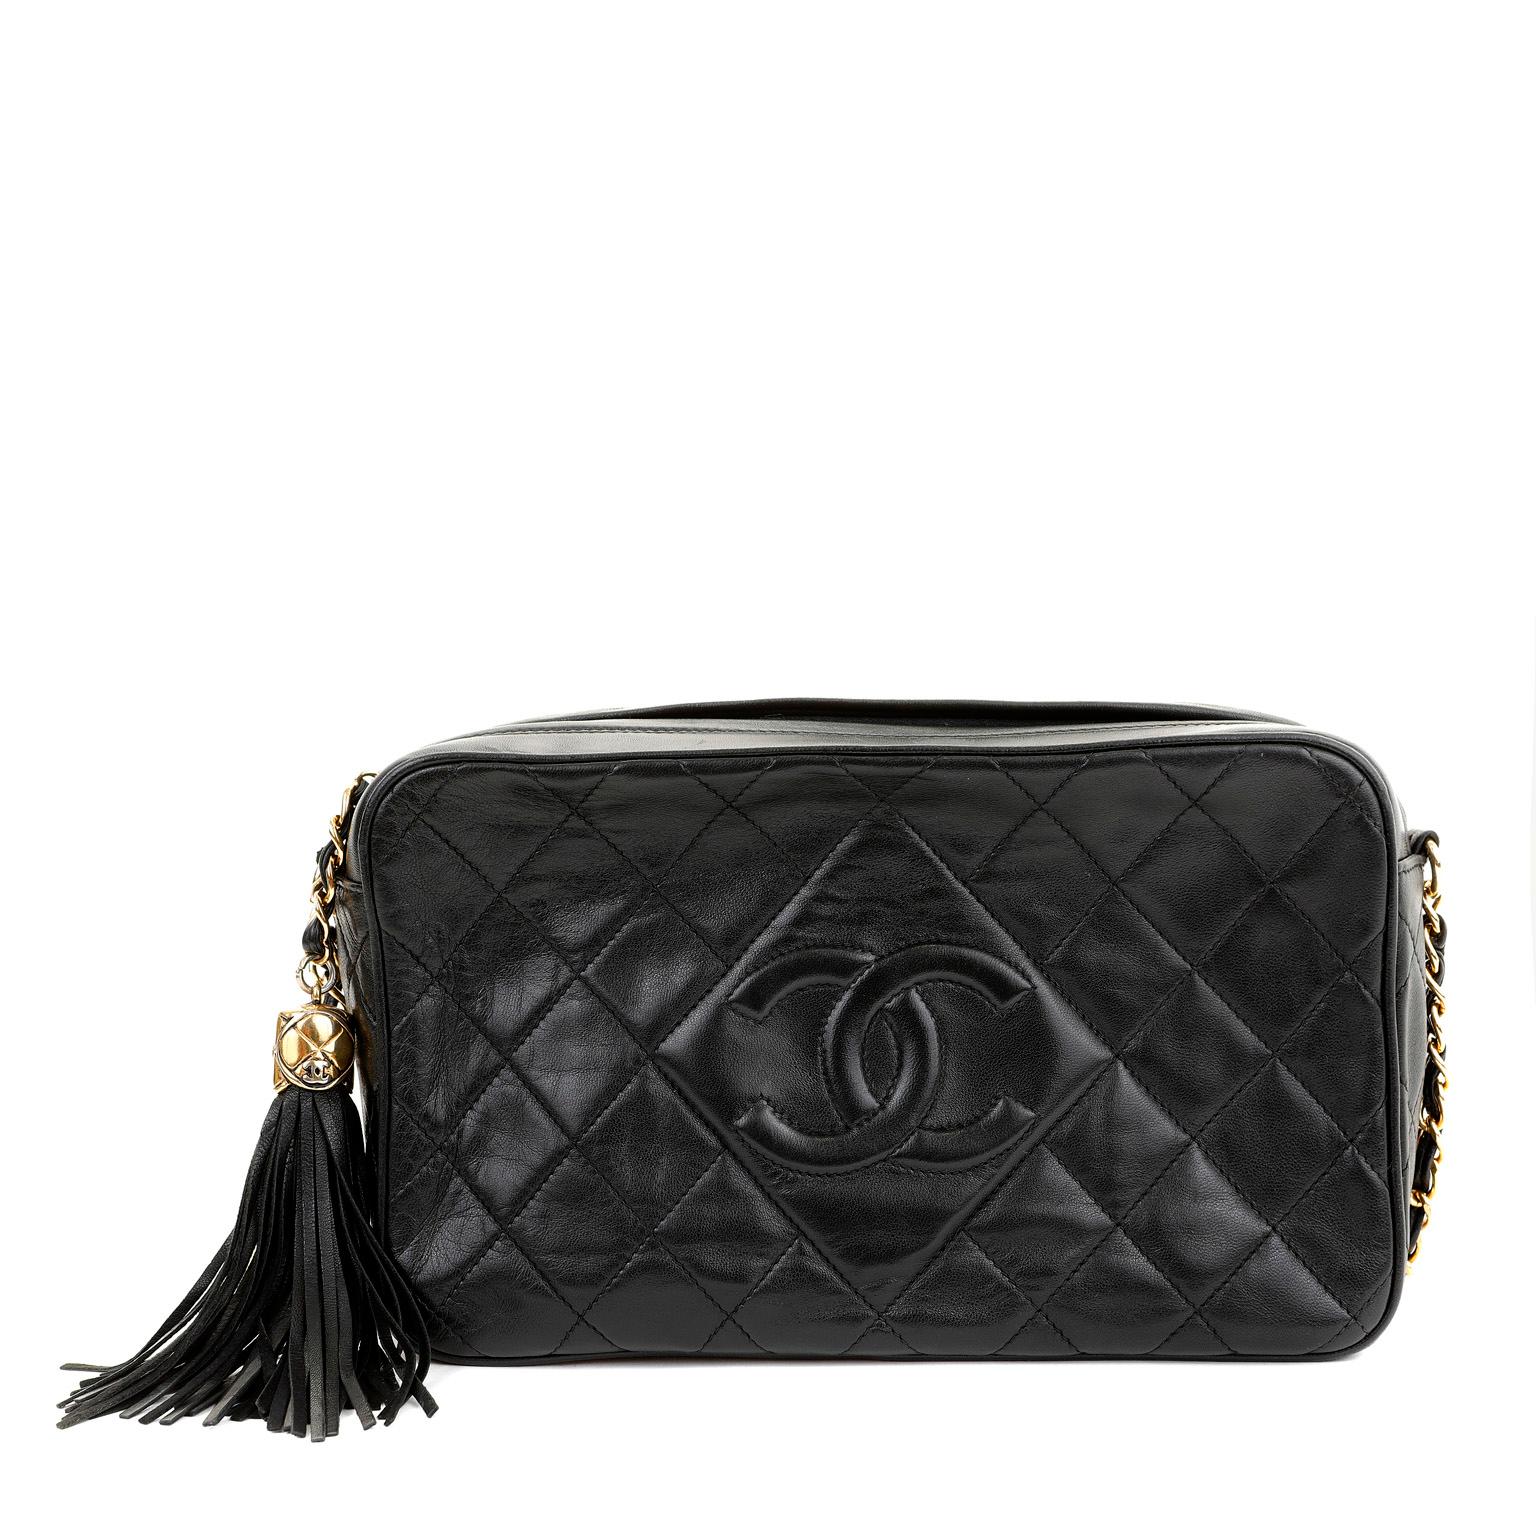 This authentic Chanel Black Lambskin Camera Bag is in good vintage condition.  Simple and elegant, the camera bag is a classic addition to any collection.  Black lambskin is quilted in signature Chanel diamond pattern.  Zippered top with oversized